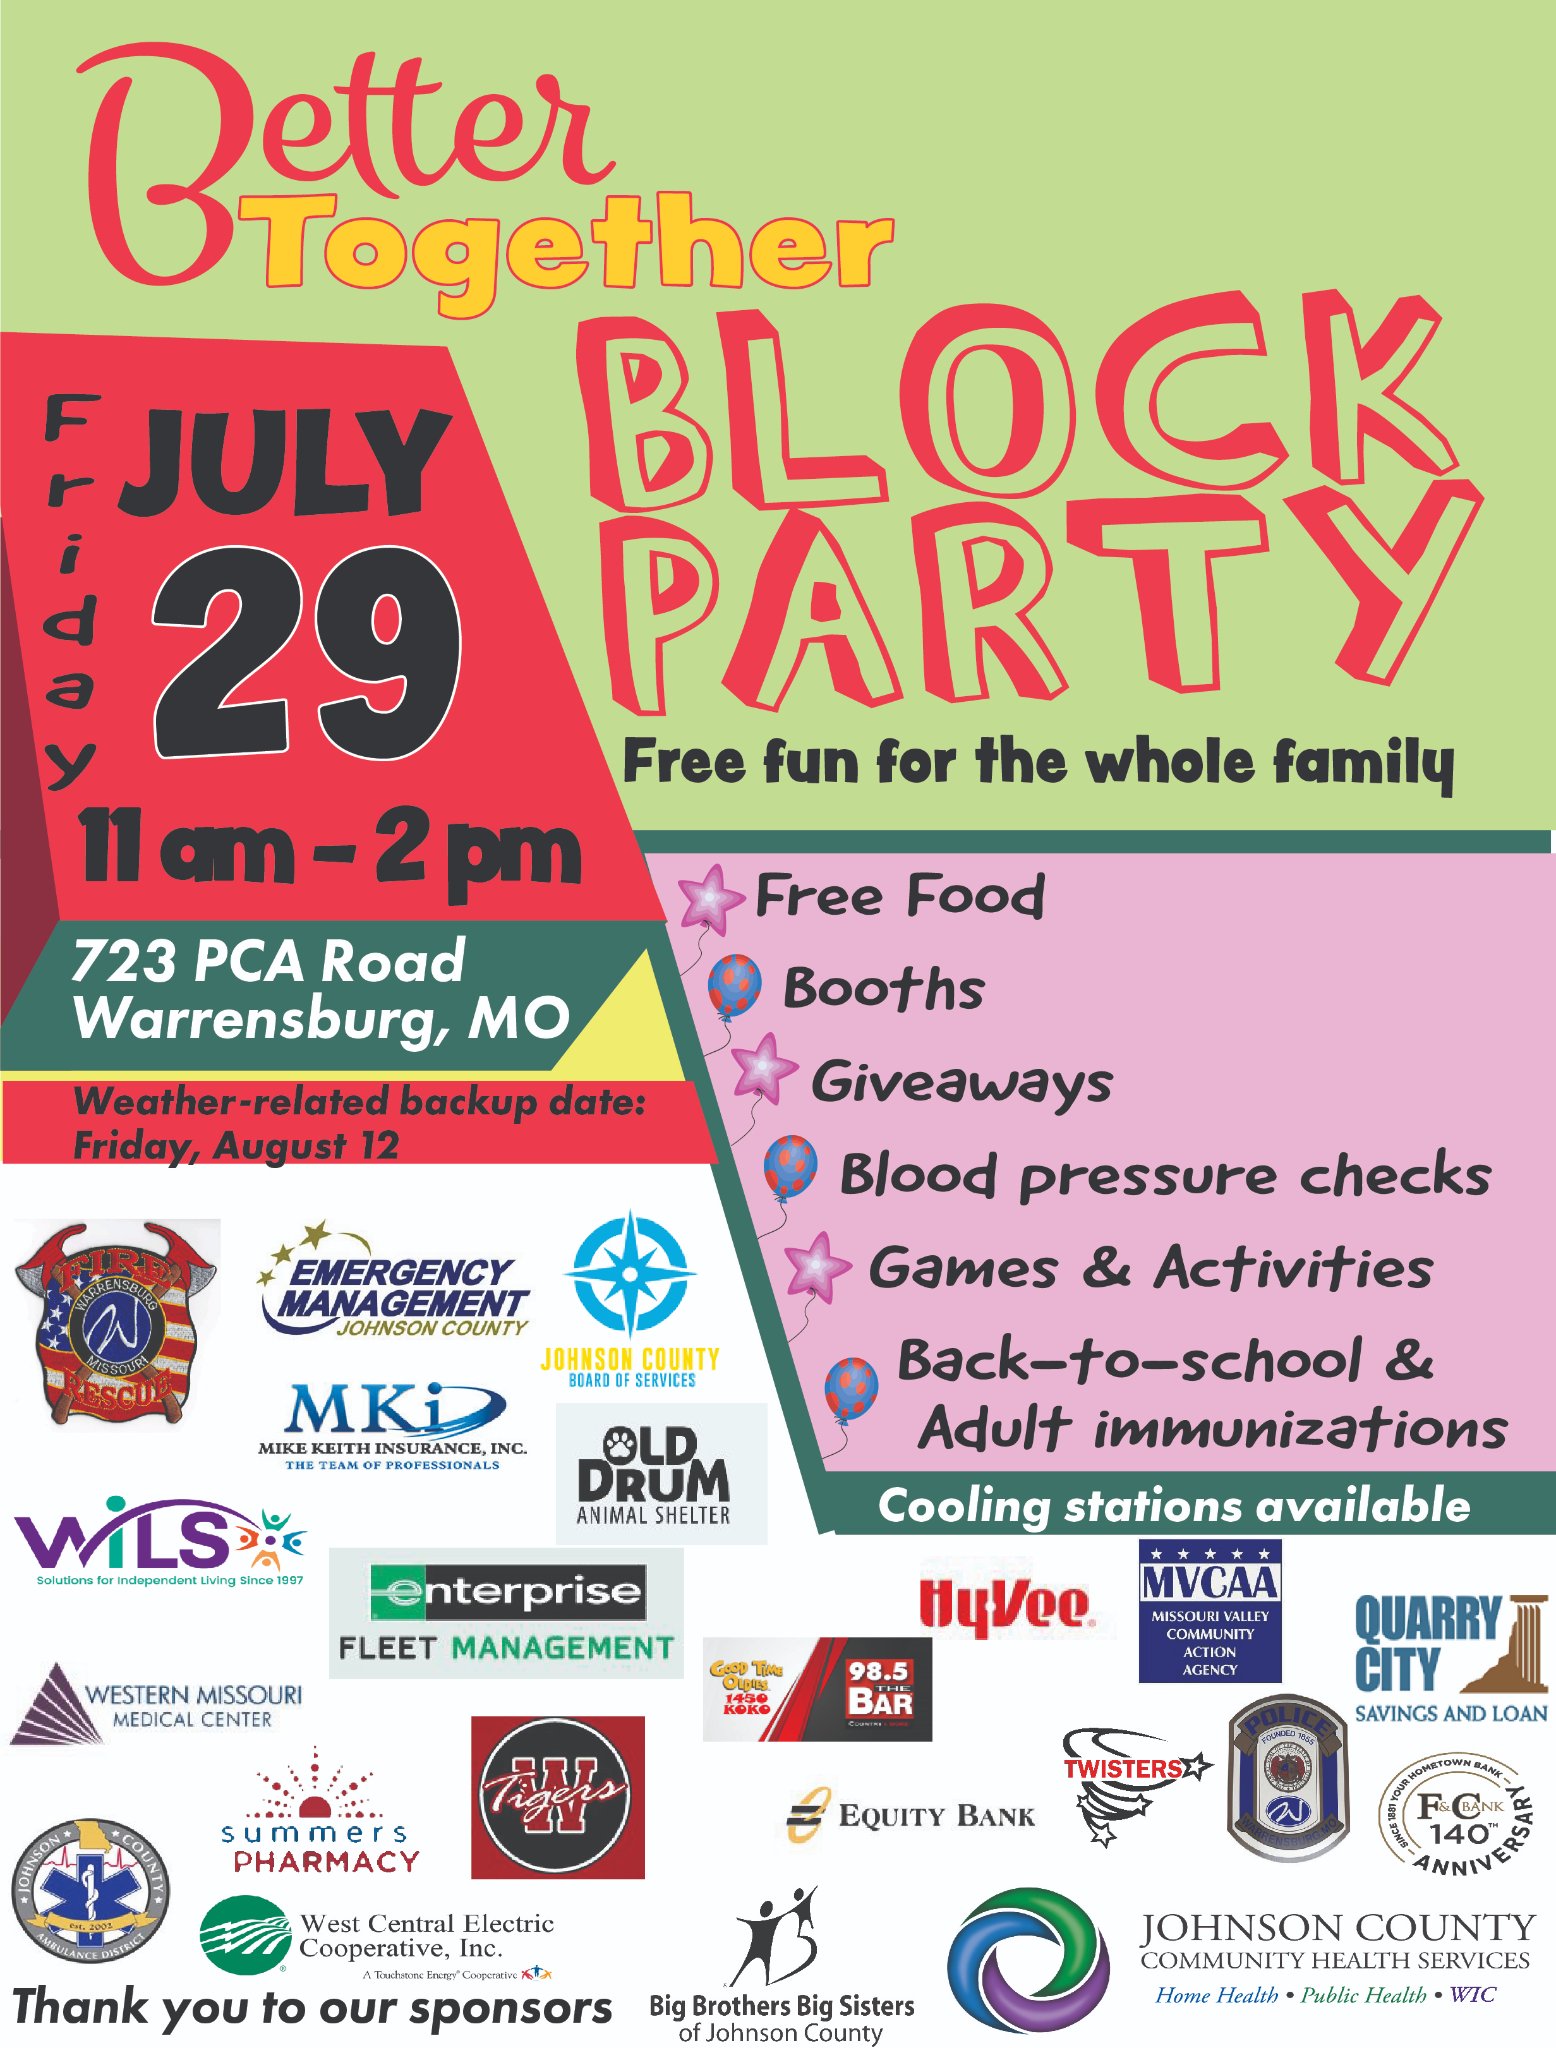 Better Together Block Party @ Johnson County Community Health Services